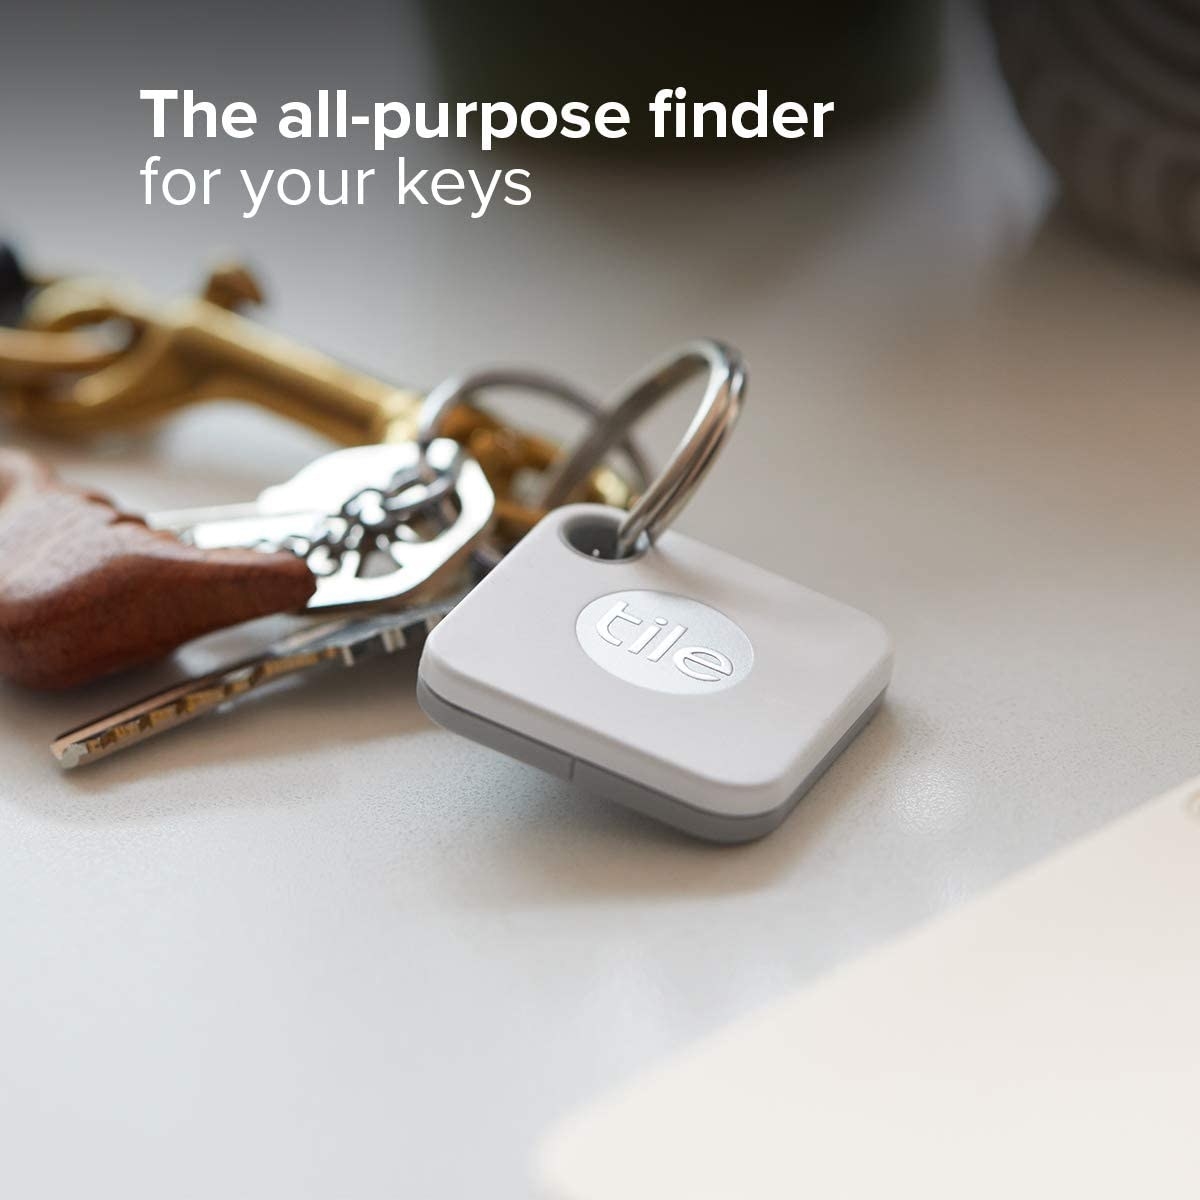 A square Bluetooth tracker attached to a ring of keys